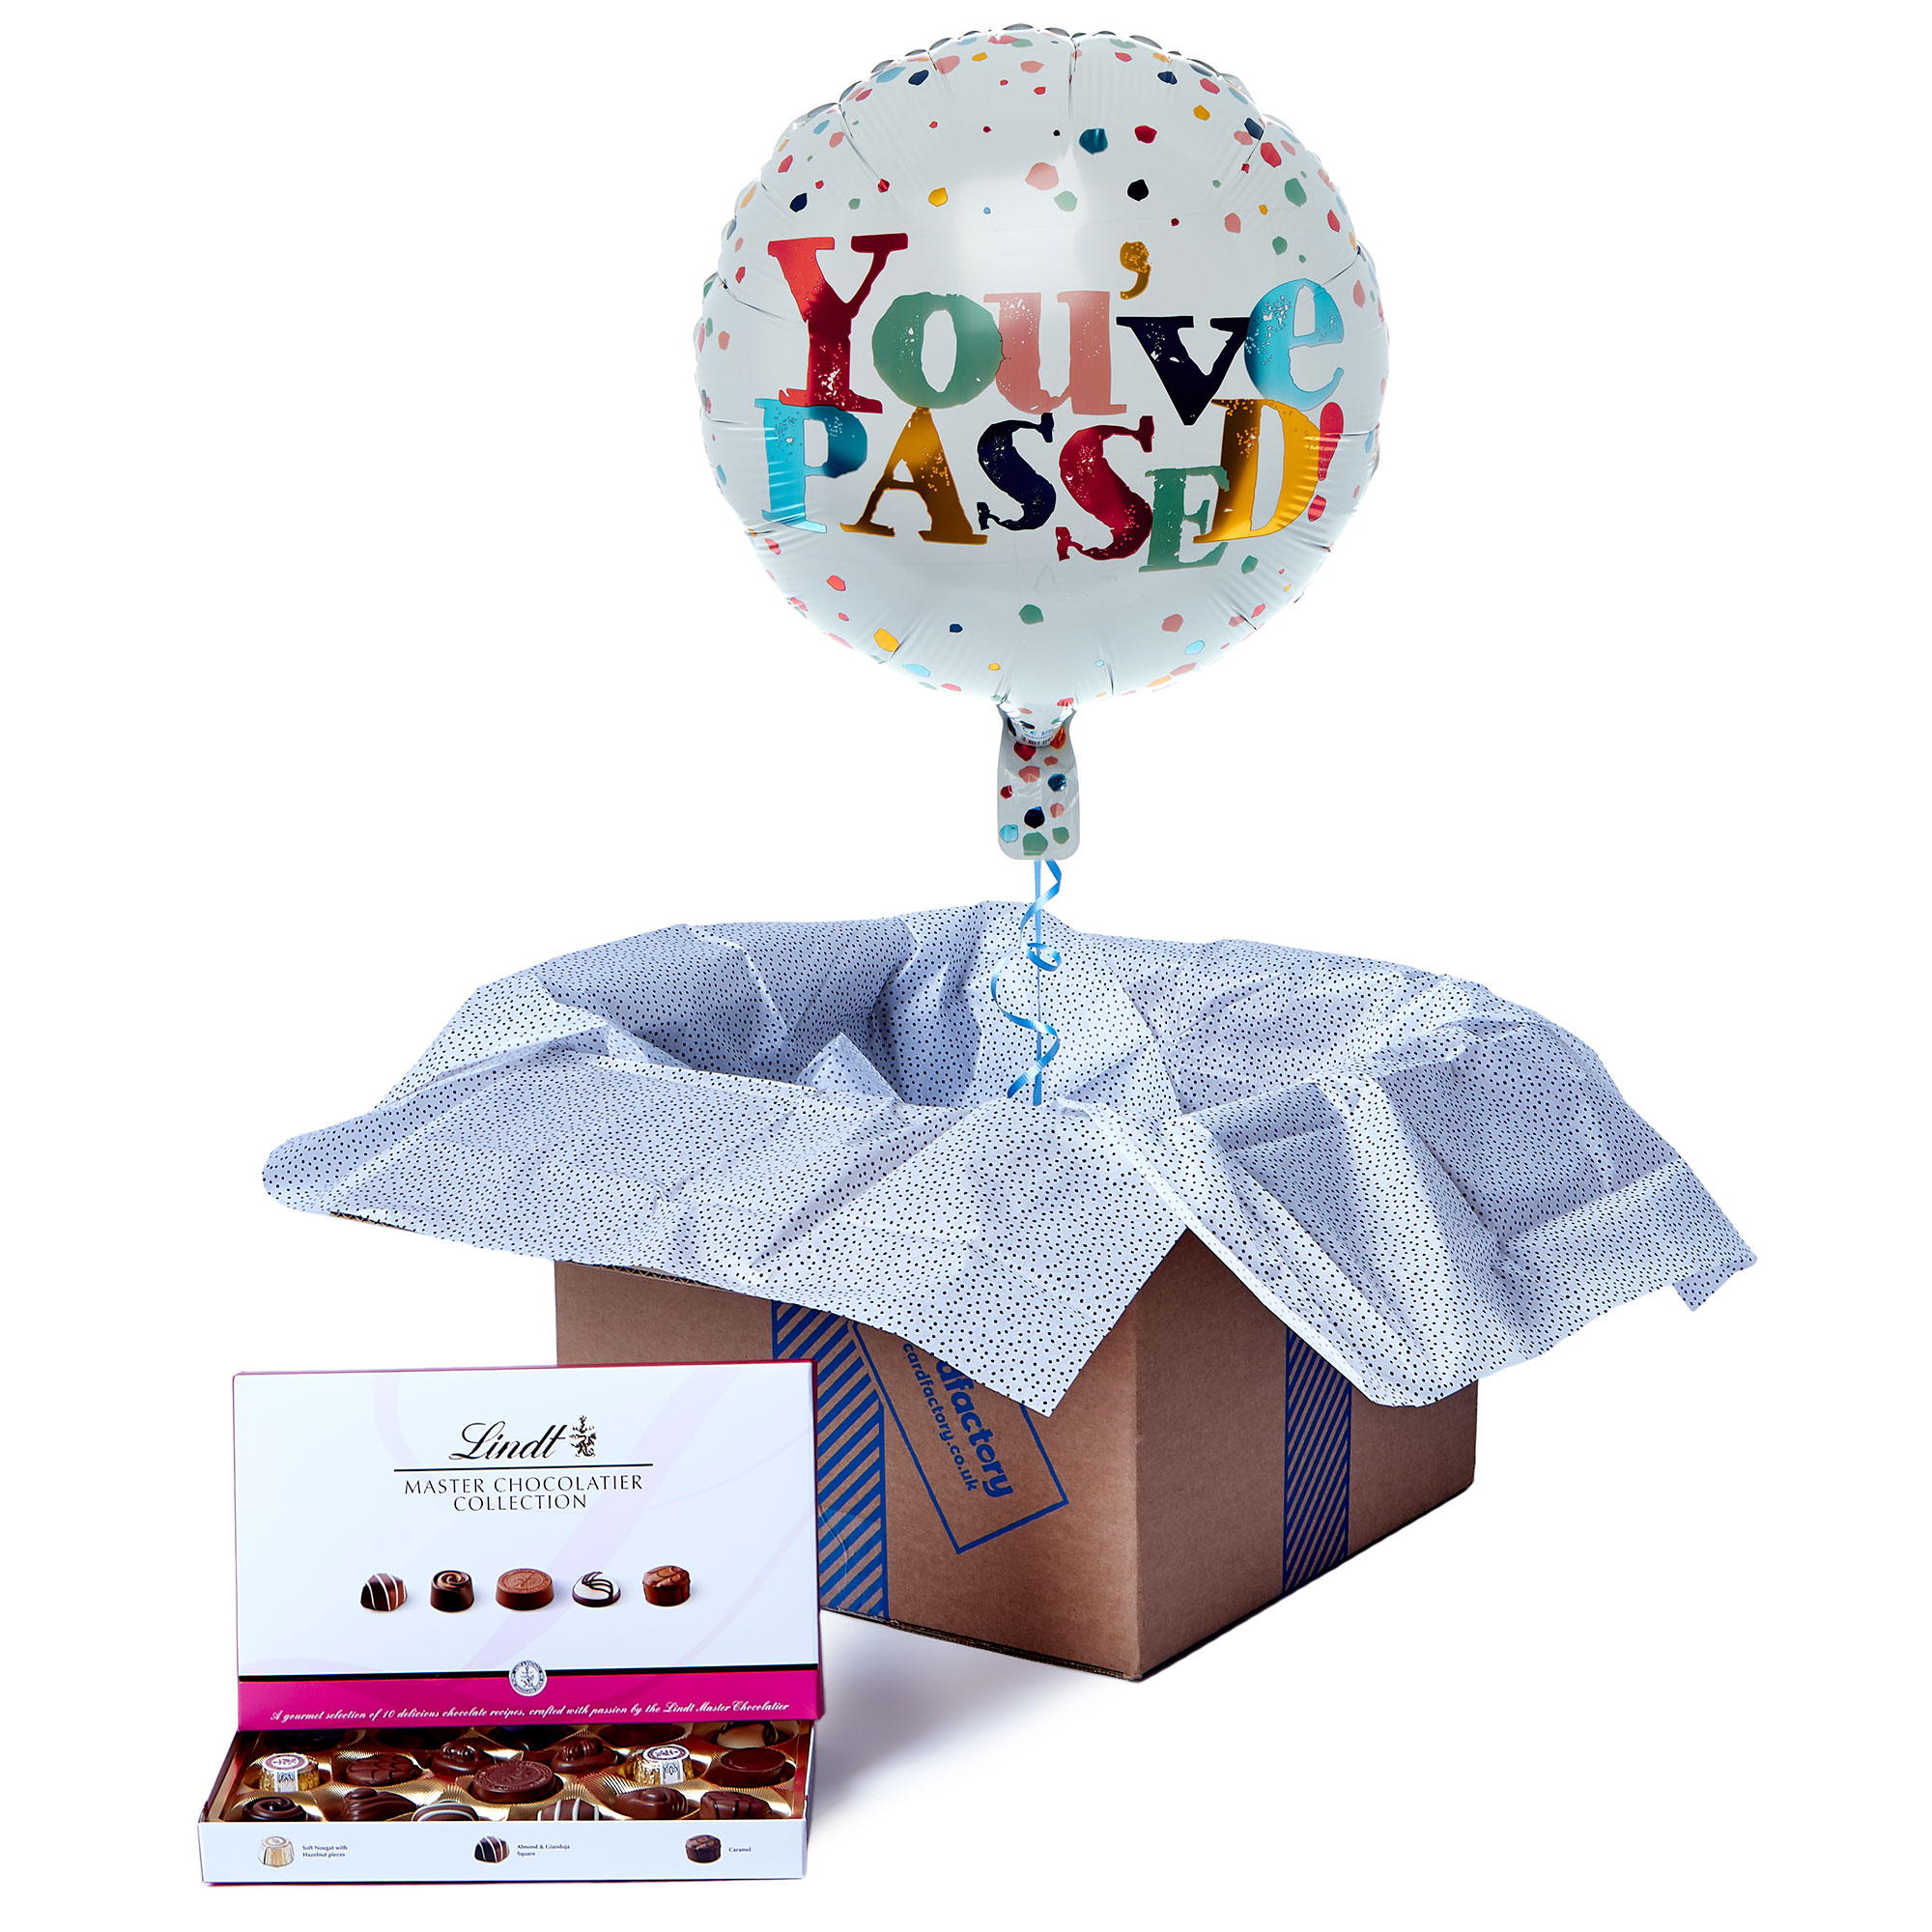 You've Passed Balloon & Lindt Chocolate Box - FREE GIFT CARD!